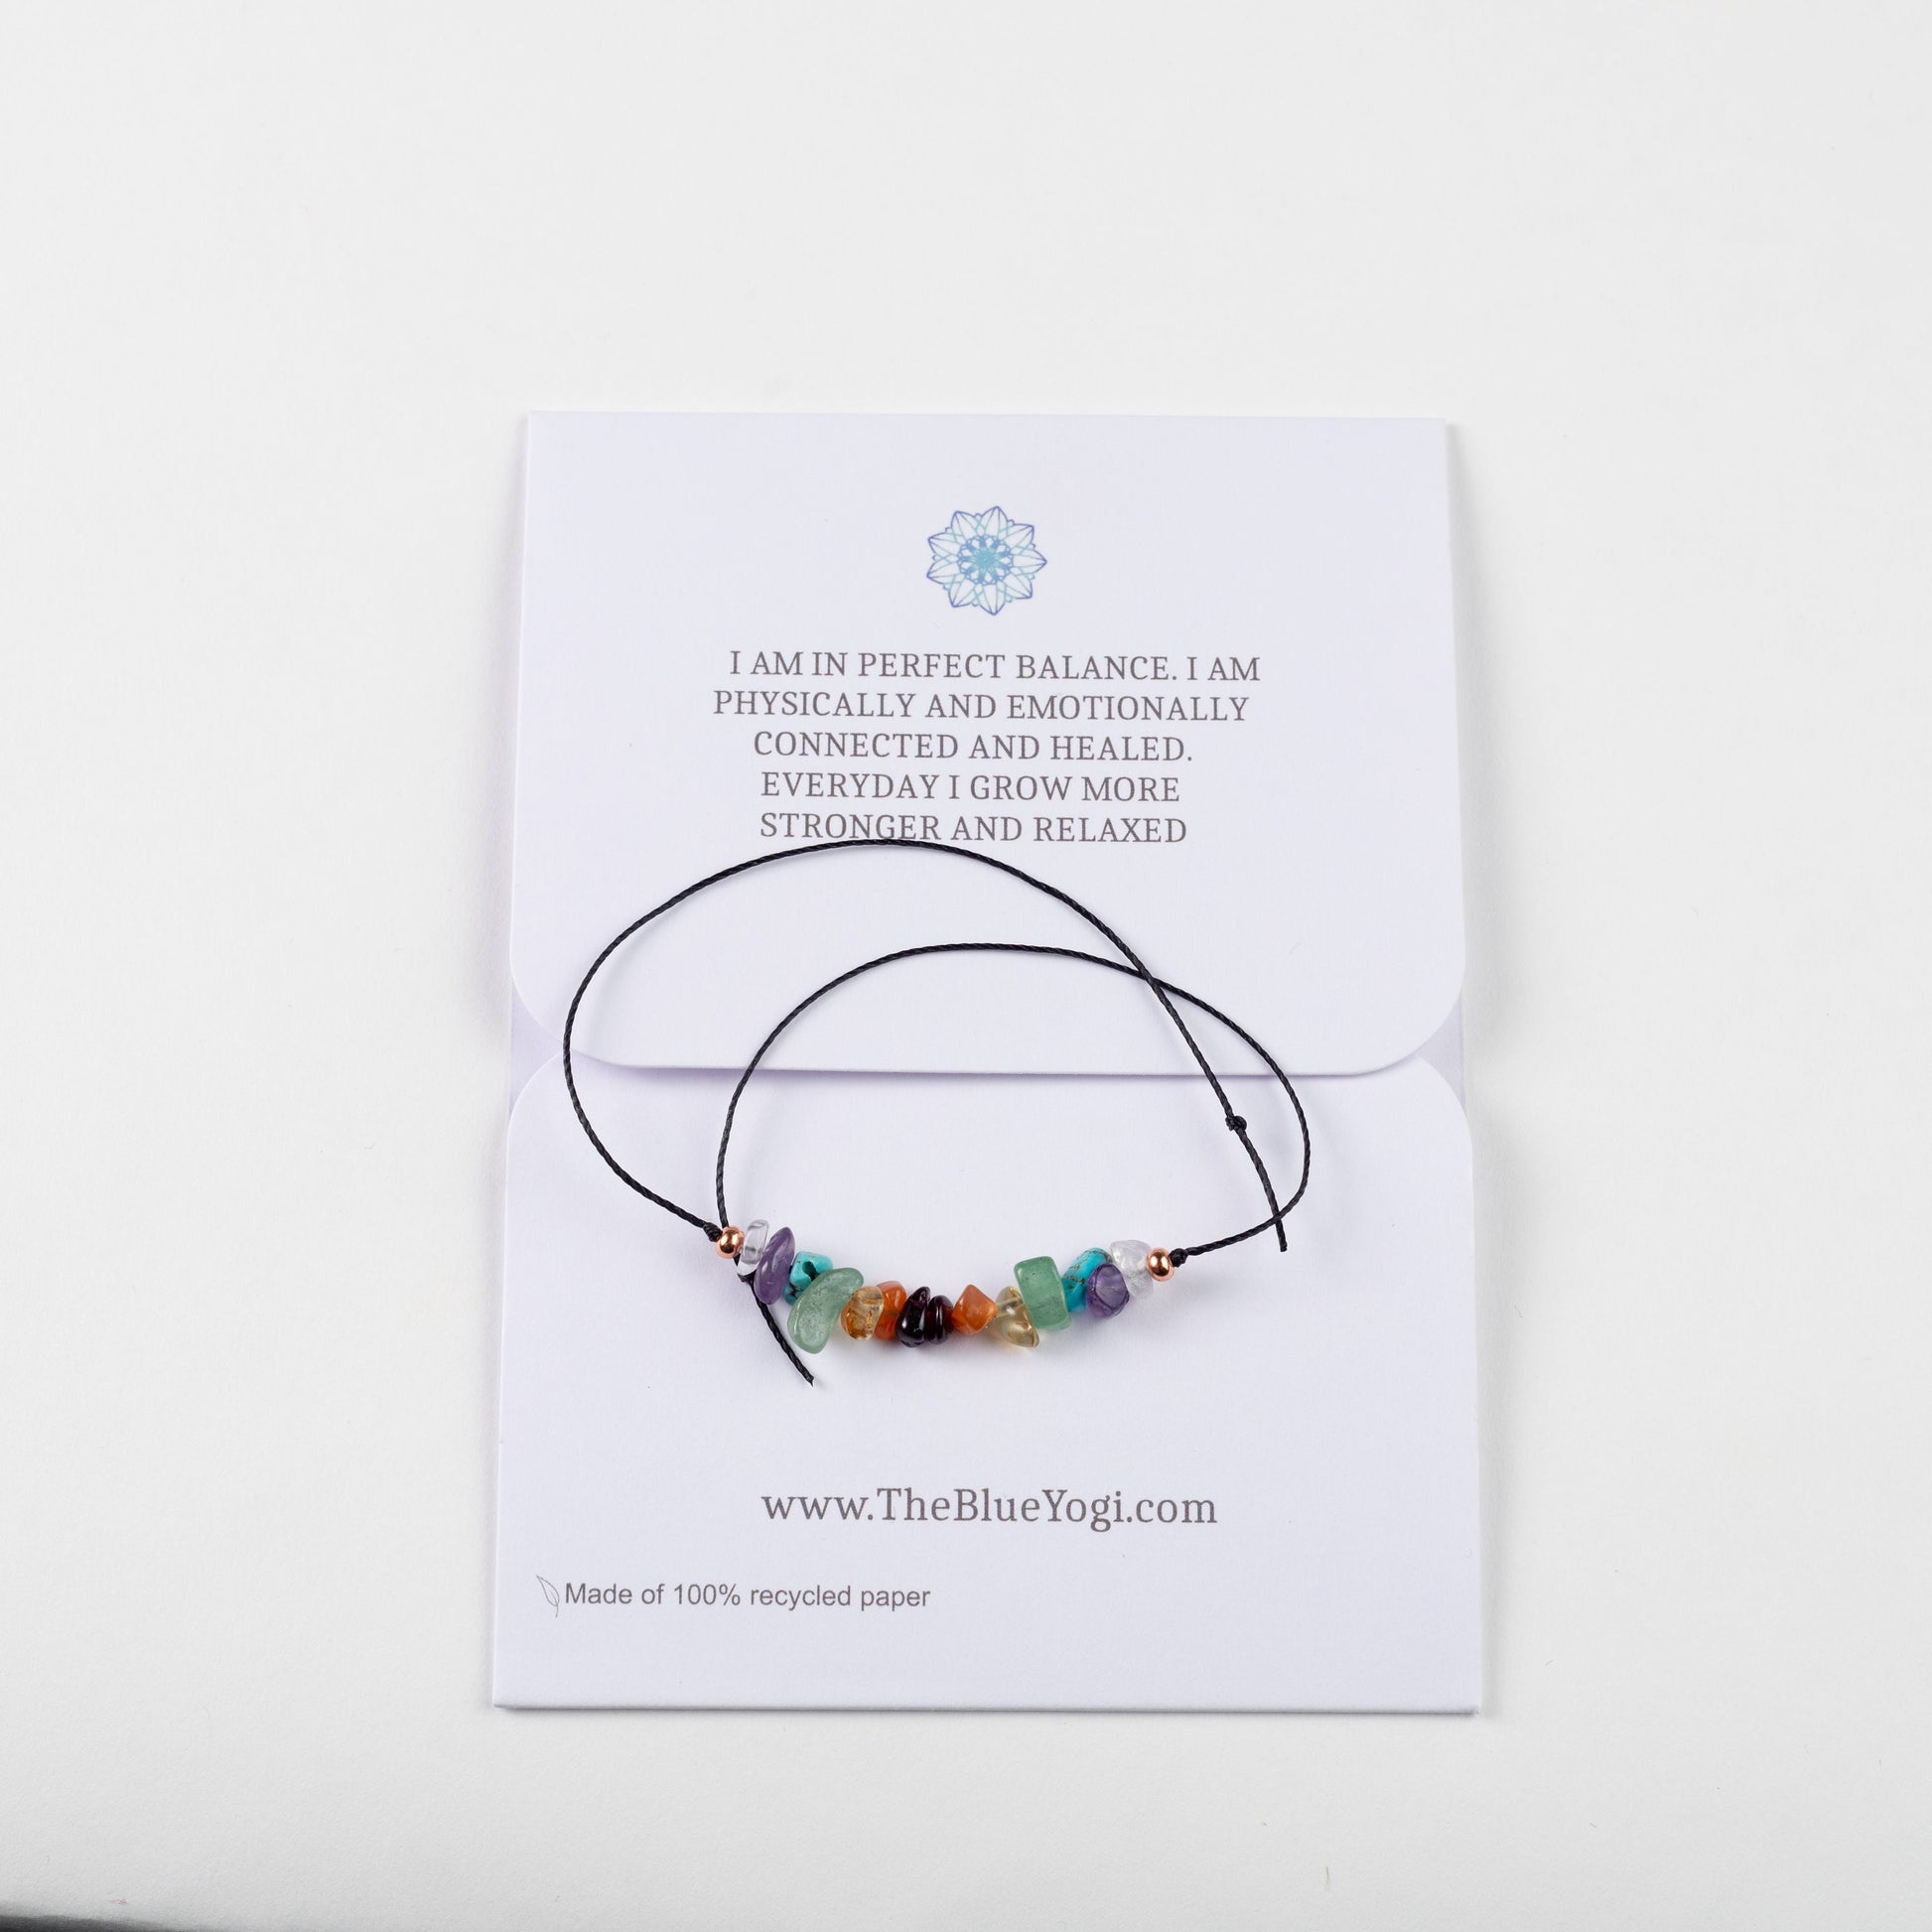 Dainty Chakra Balance crystal bracelet/anklet with an affirmation - Eco friendly and Sustainable - Tie closure - Theblueyogi